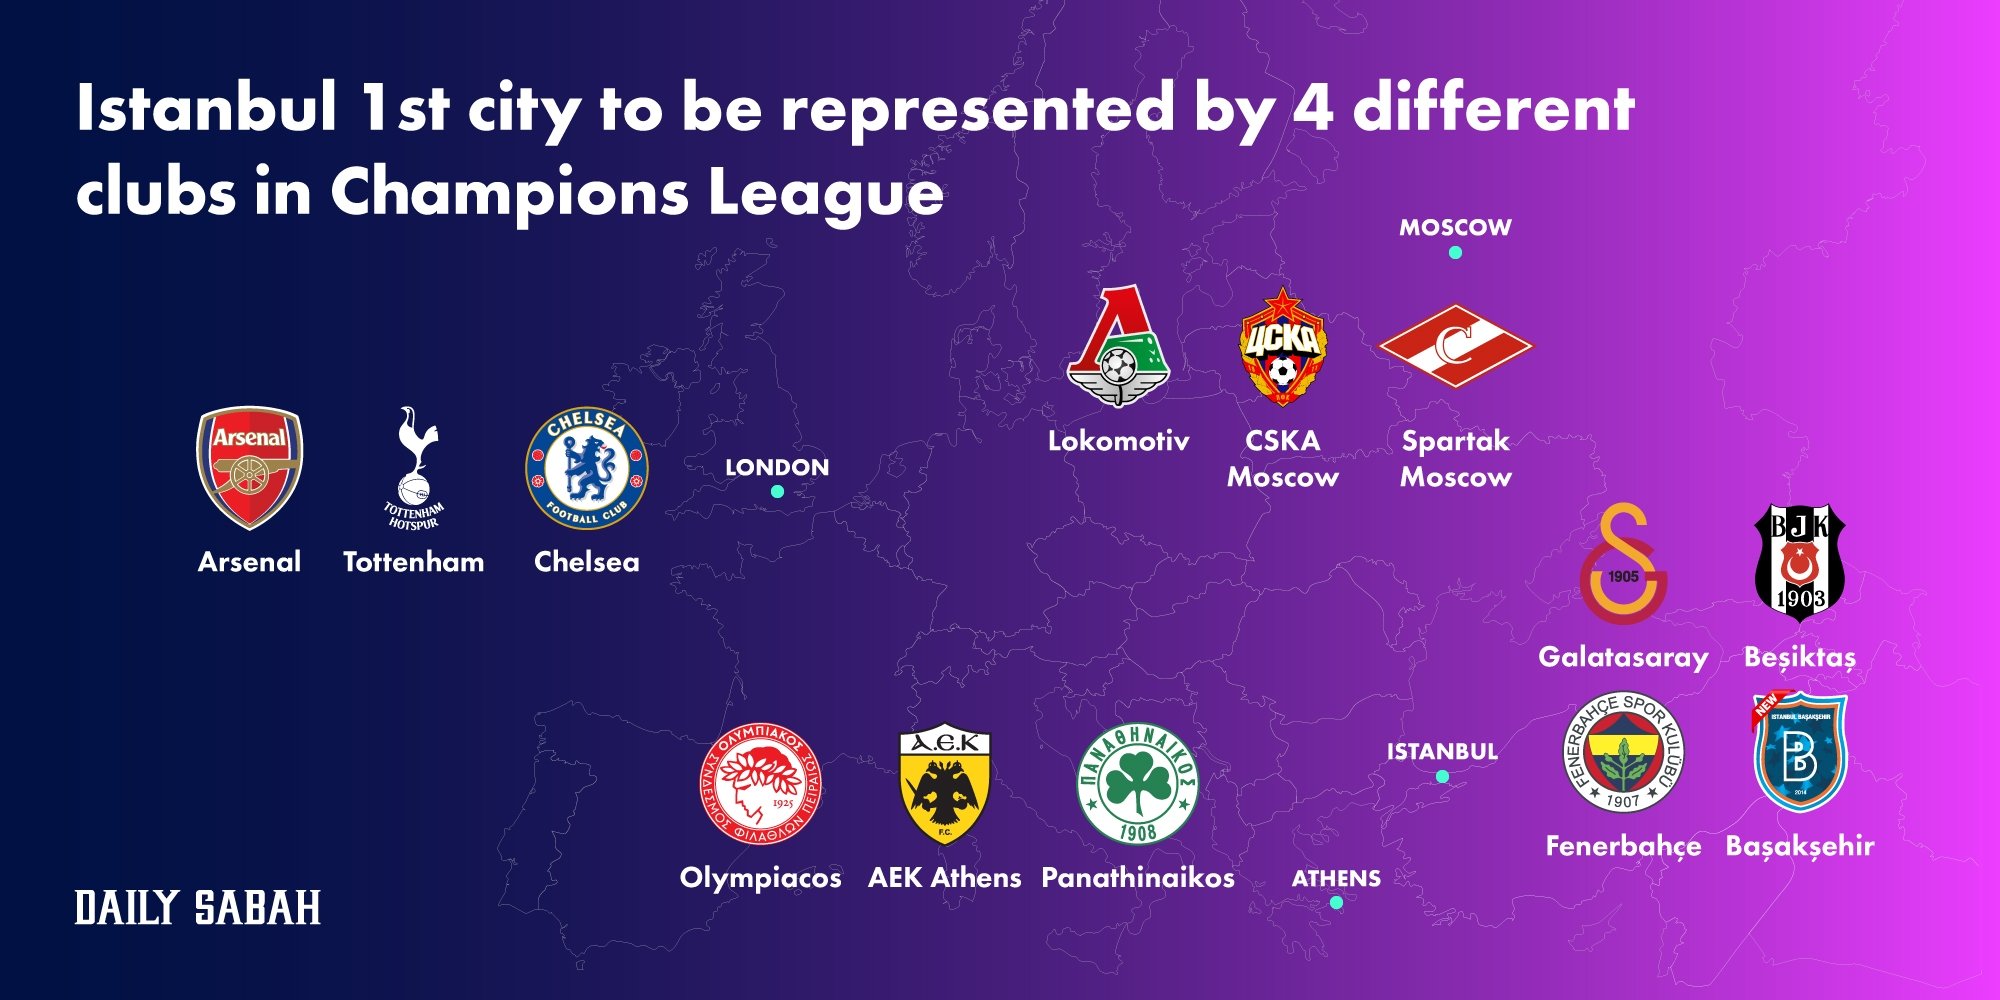 I stor skala tidevand mirakel Istanbul 1st city to be represented by 4 different clubs in Champions  League | Daily Sabah